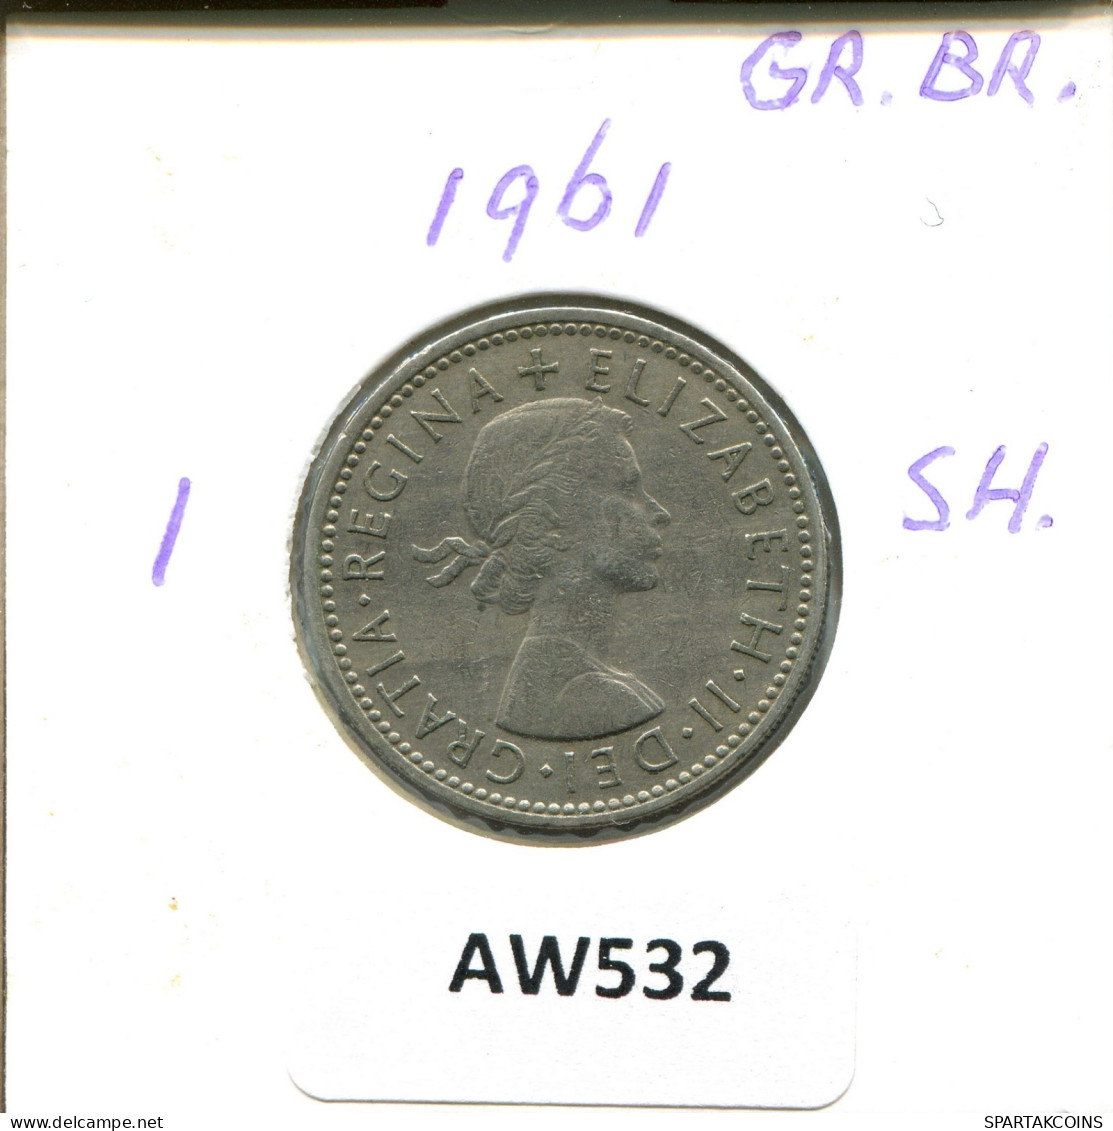 SHILLING 1961 UK GREAT BRITAIN Coin #AW532.U.A - I. 1 Shilling